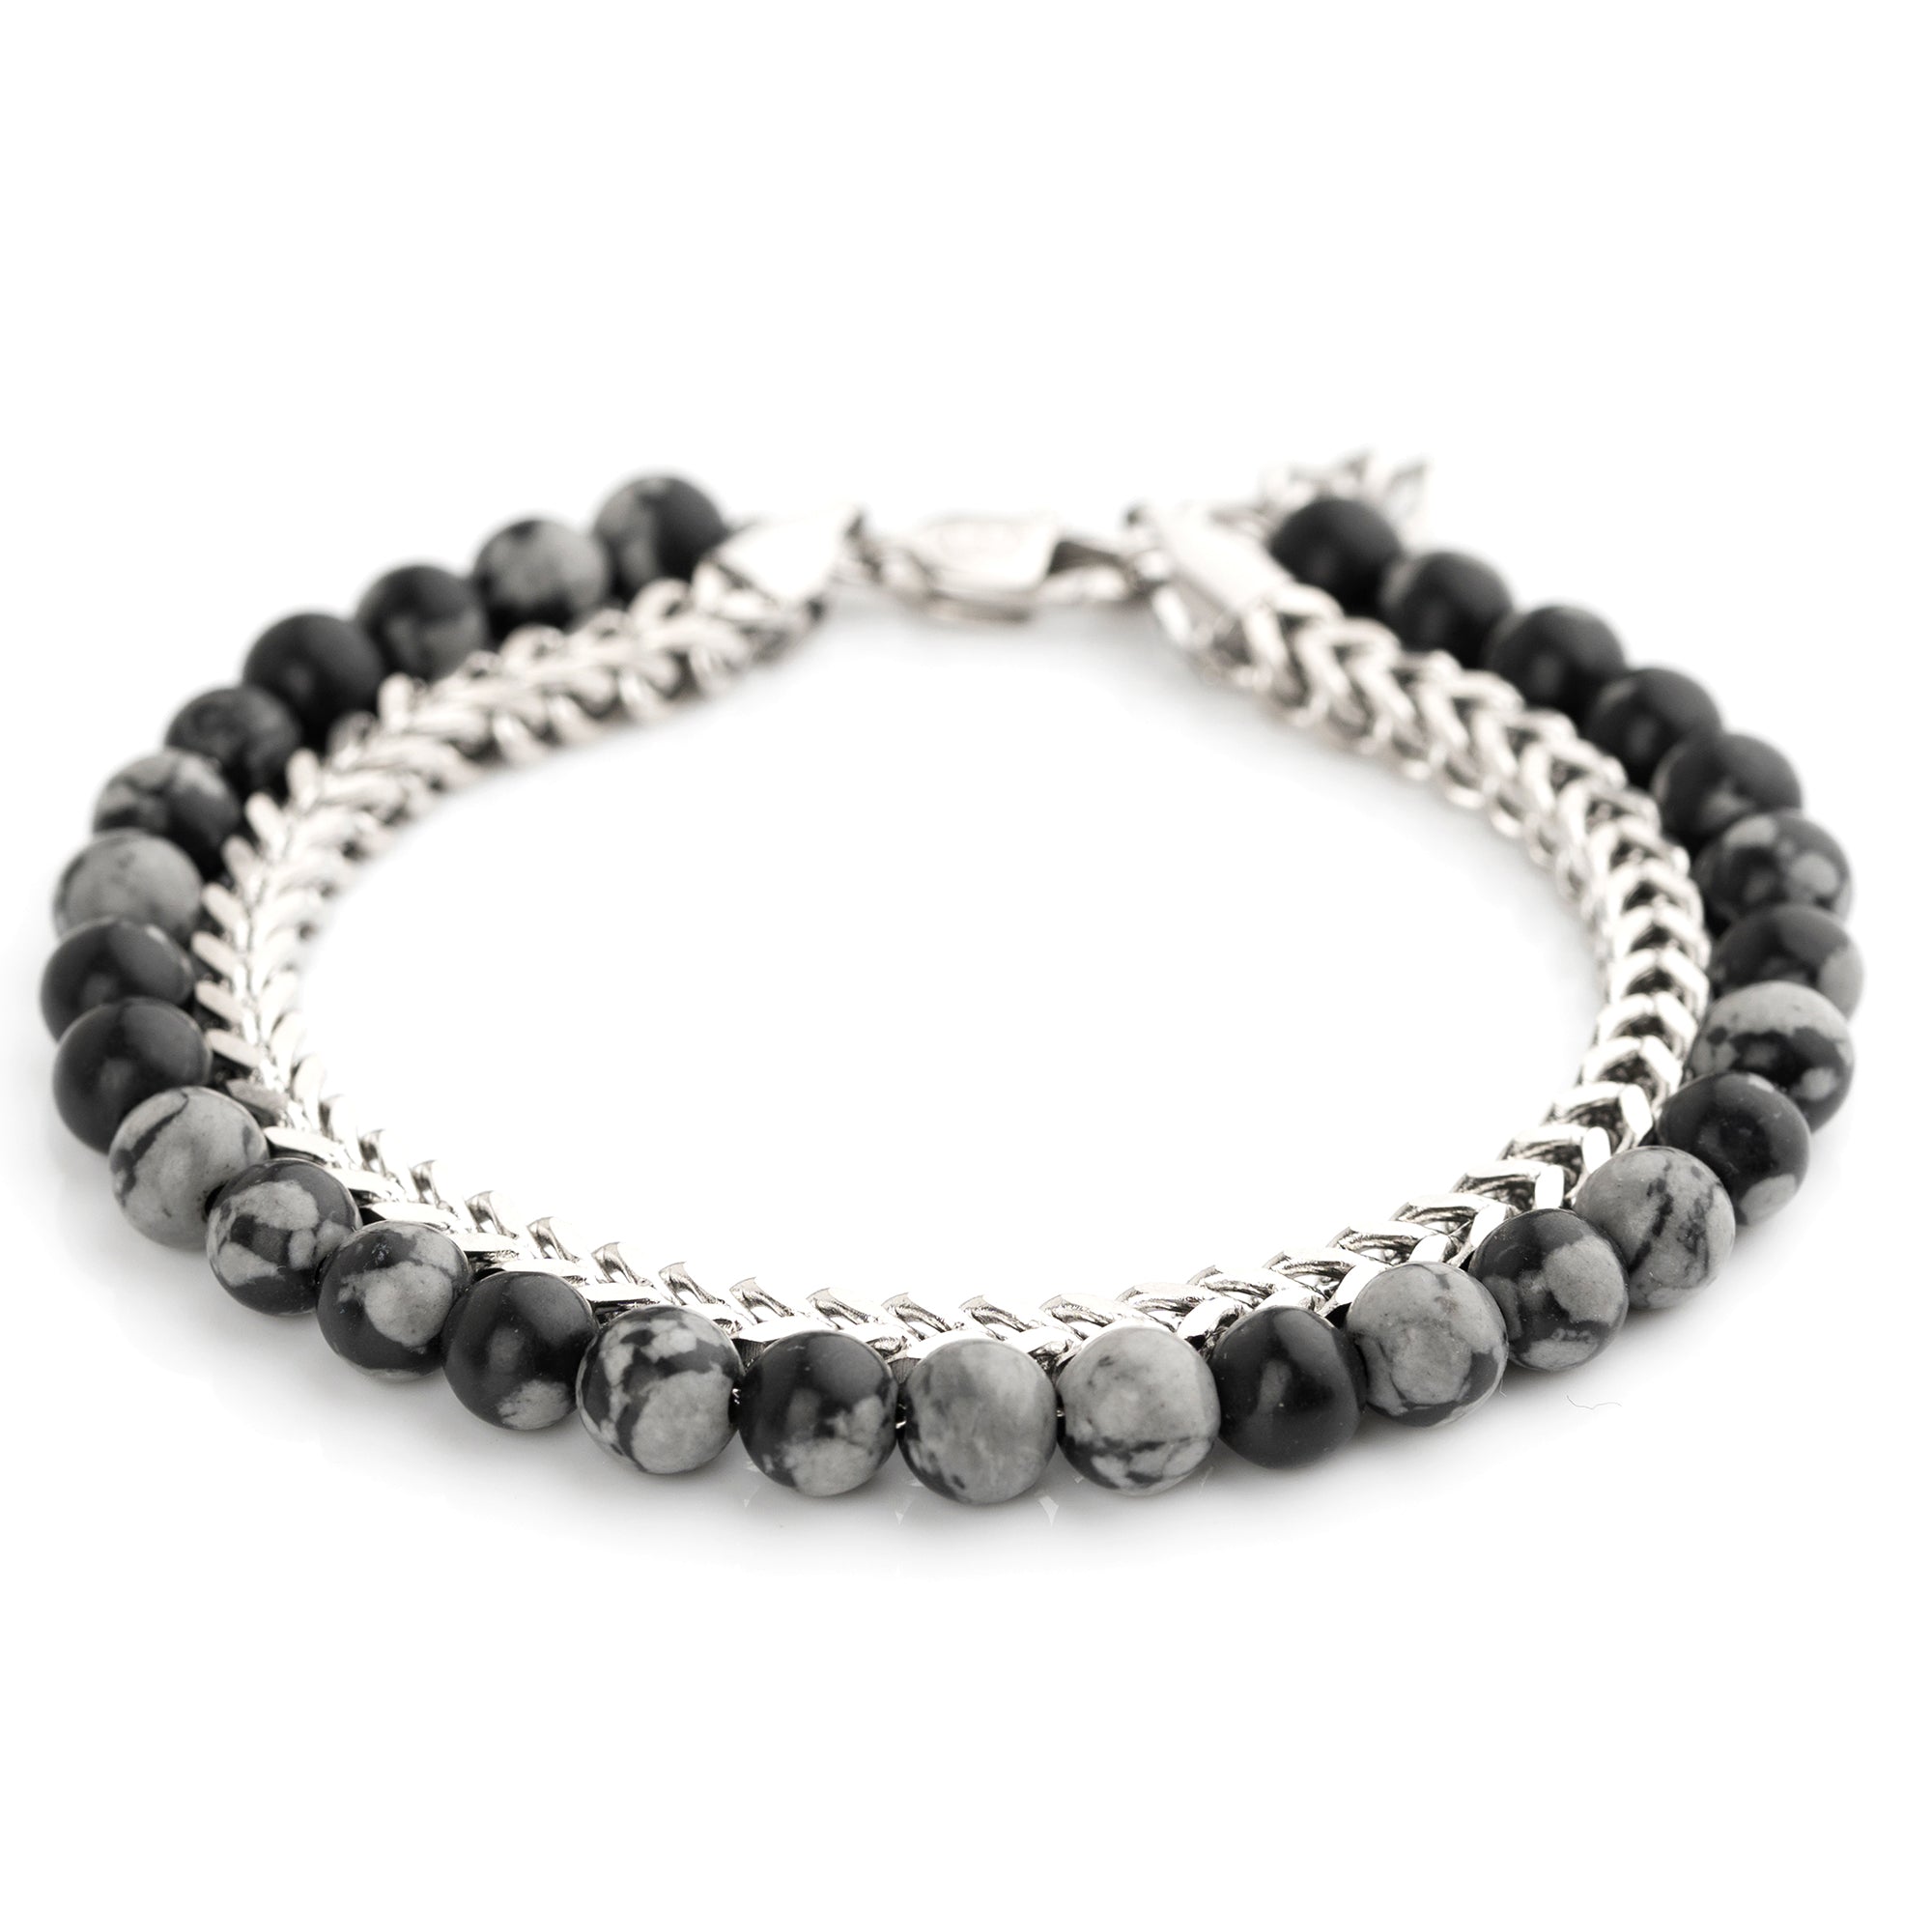 Stone Beads & Chain Bracelet Set (Silver-Plated)